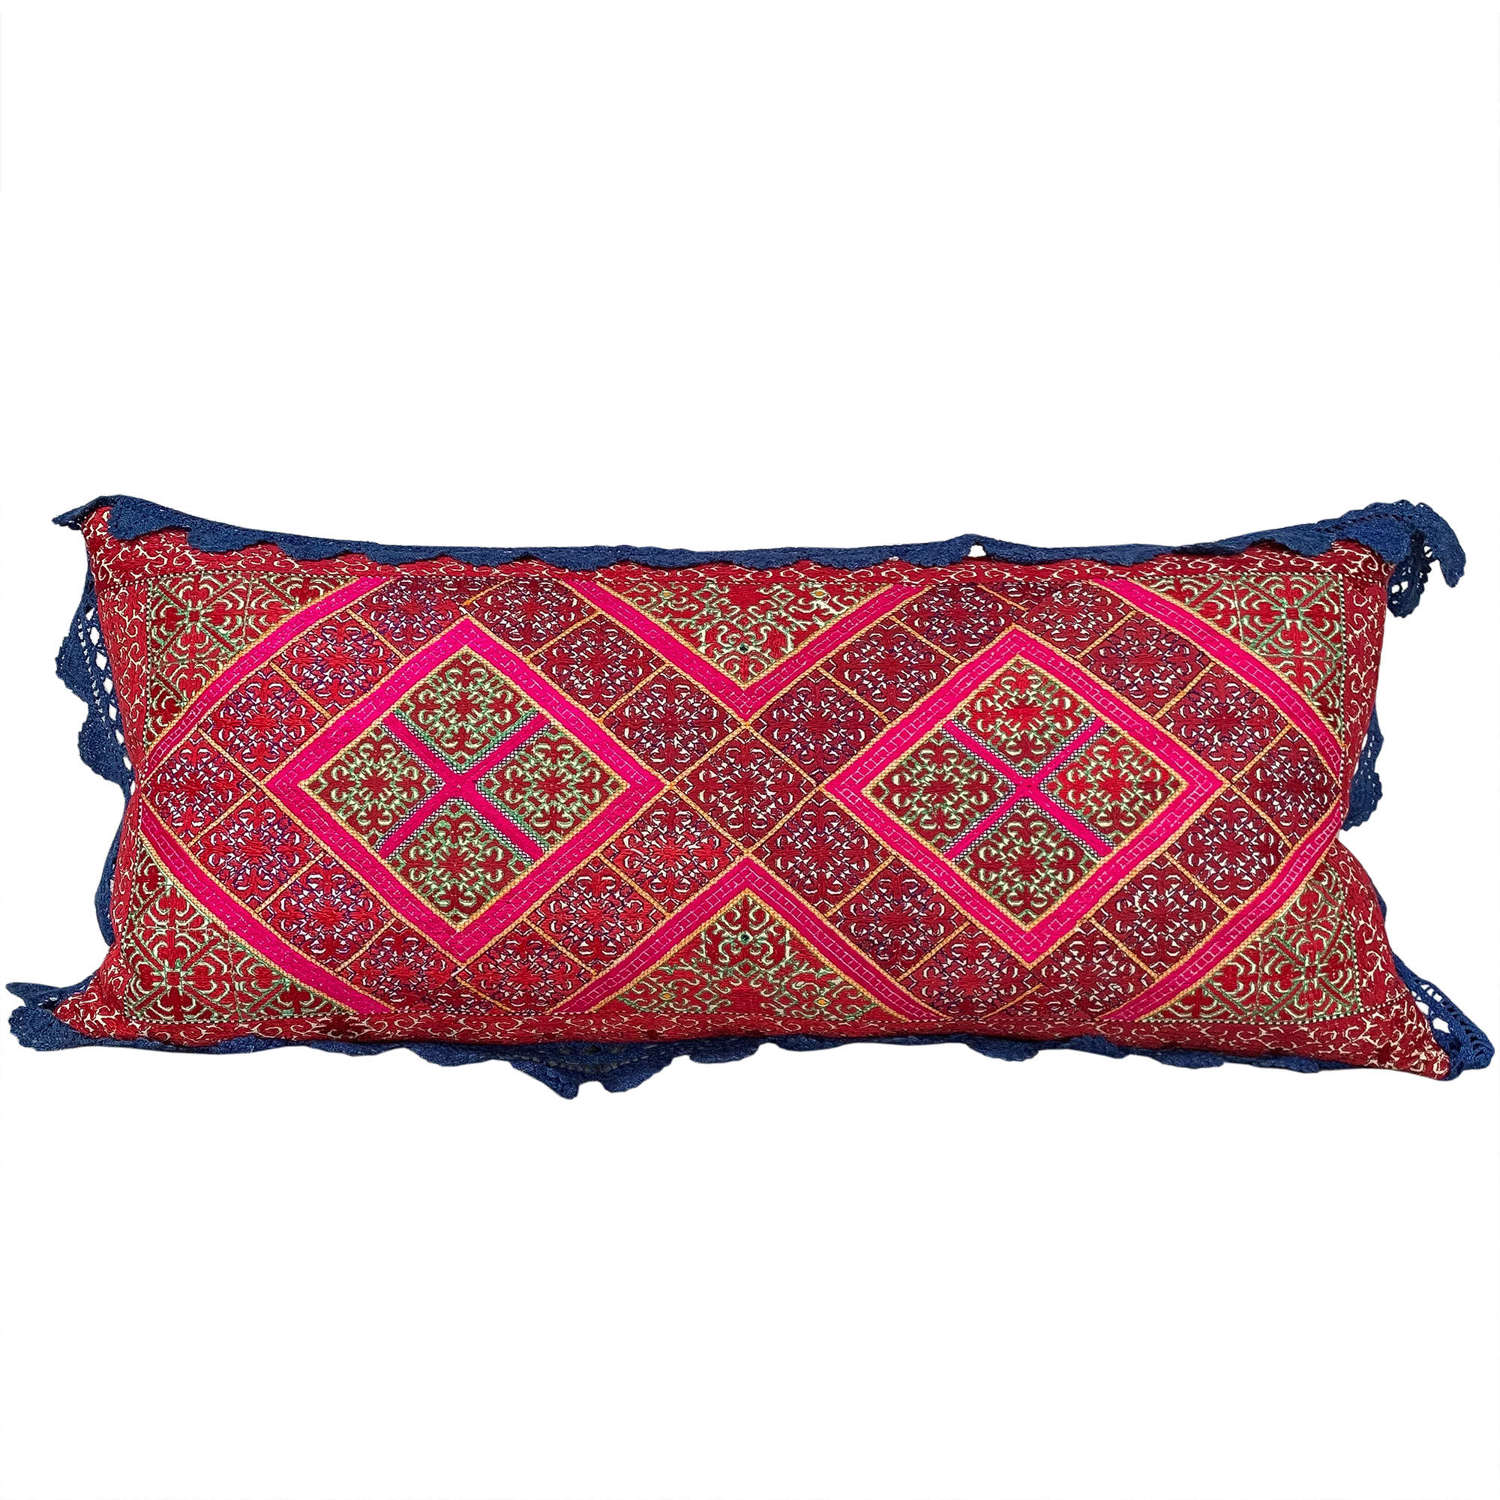 Swat marriage pillow with crochet trim